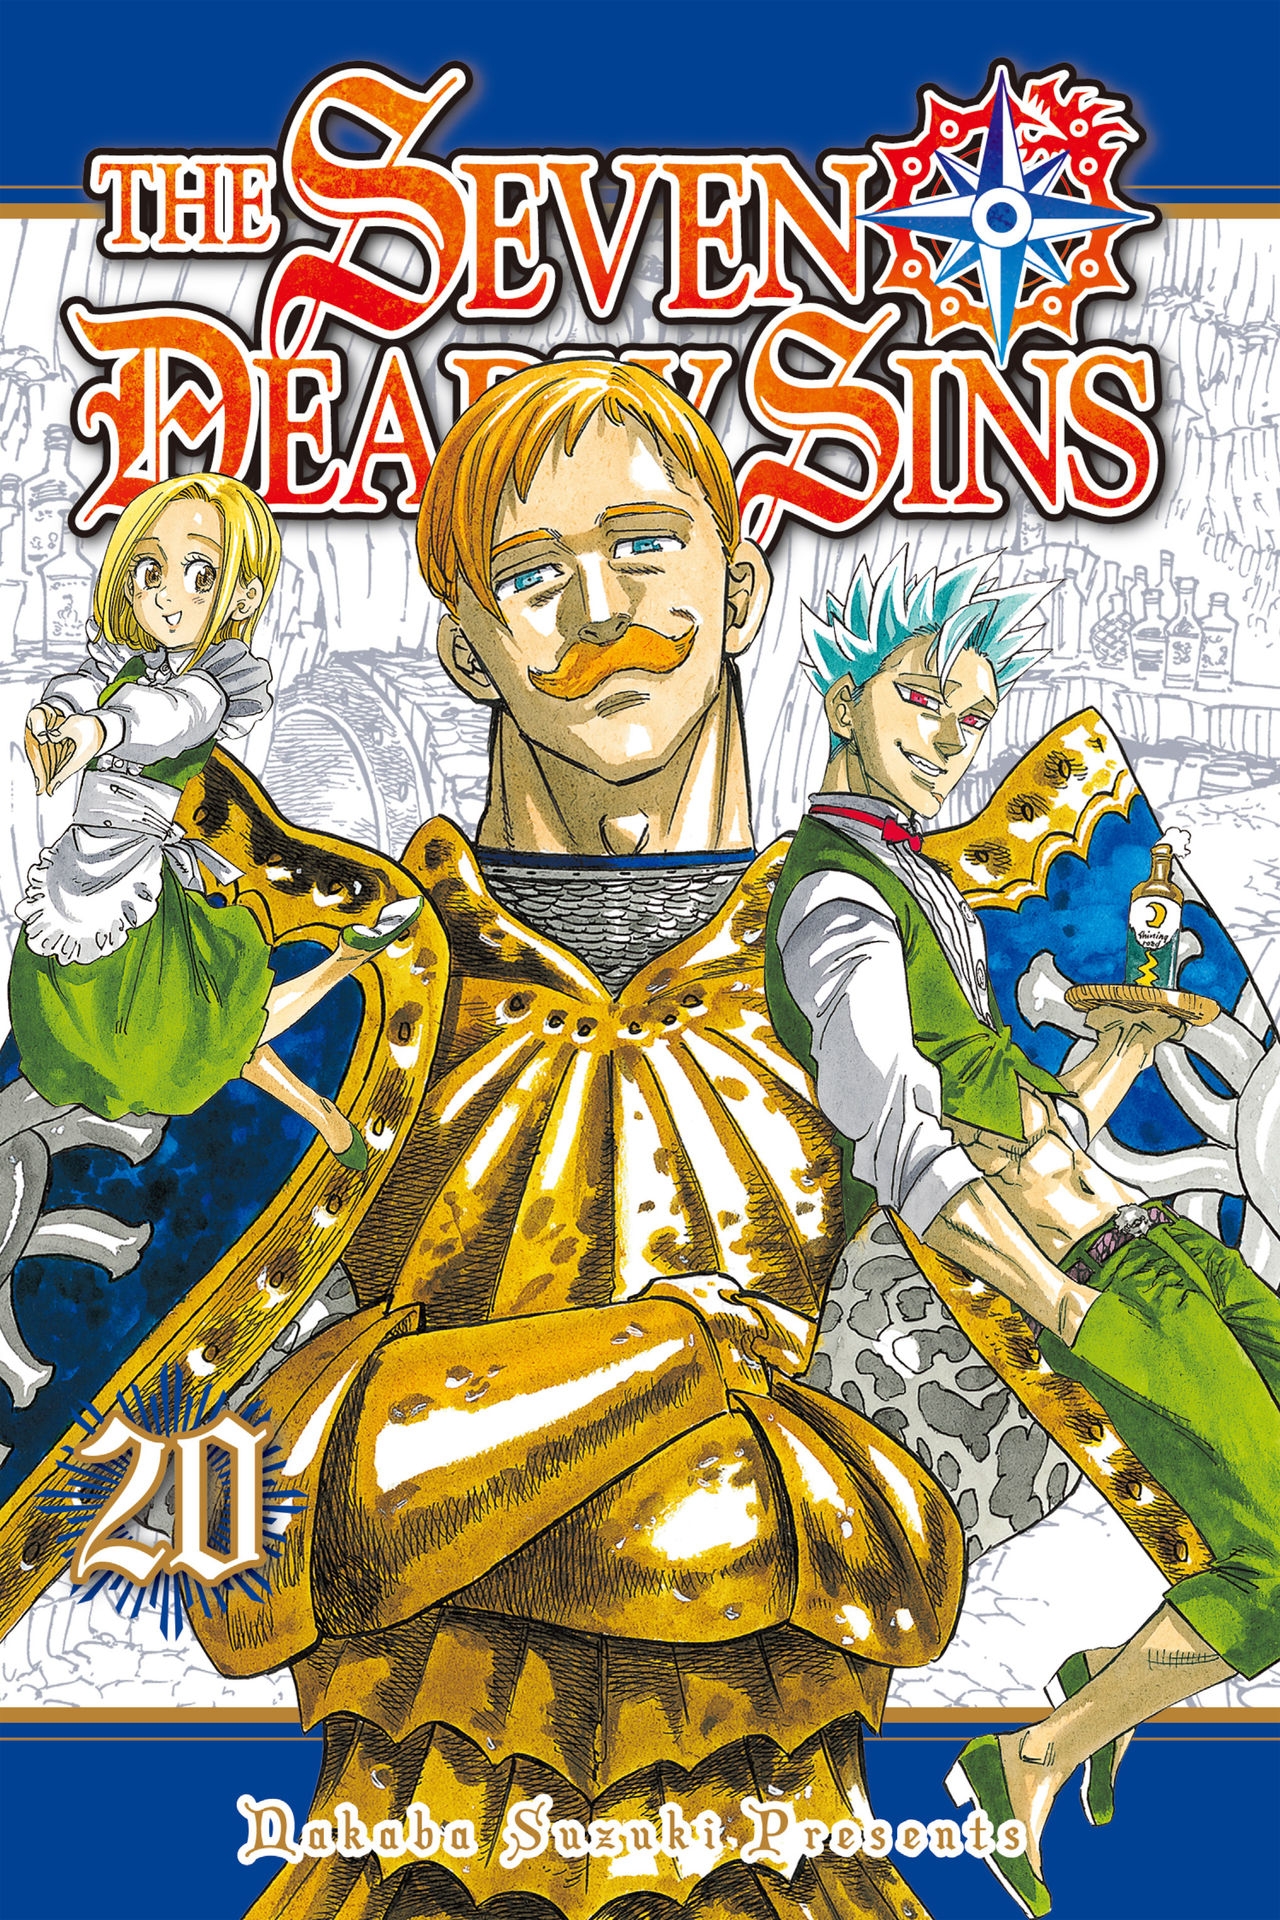 The Seven Deadly Sins (Covers & Chapter Title Cards) 357